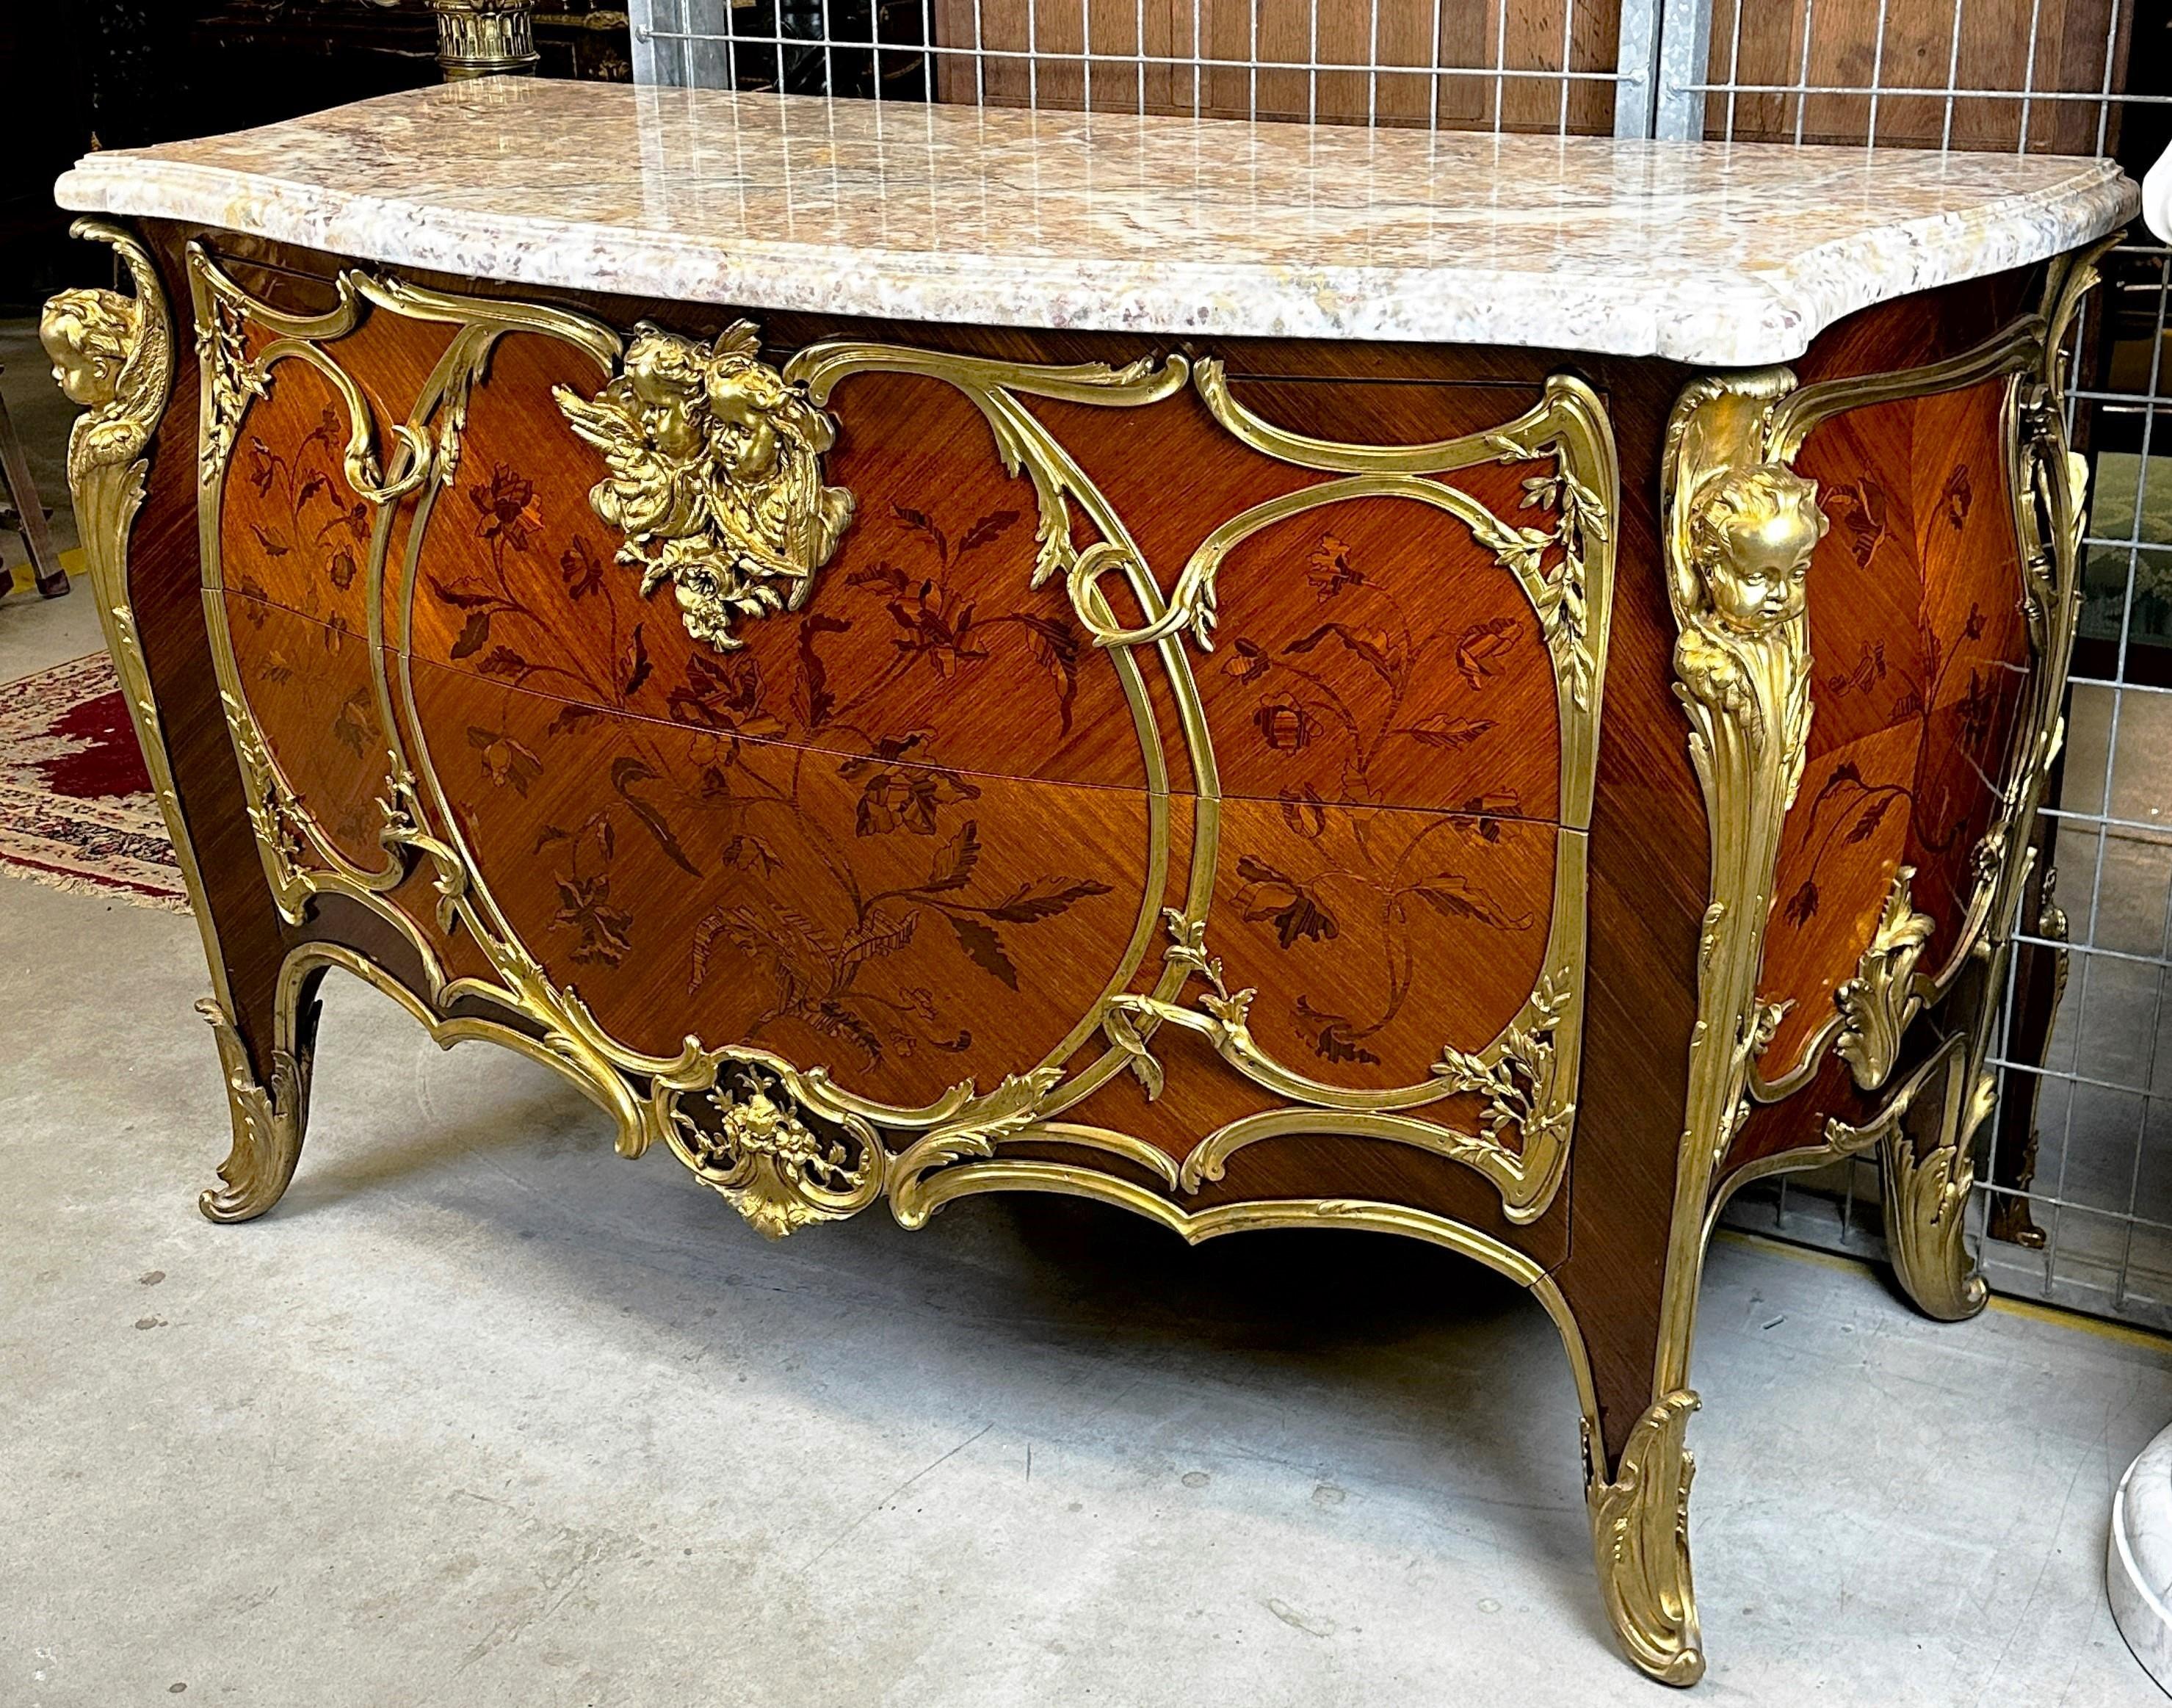 An impressive Louis XVI style chest of drawers, made at the turn of the 19th and 20th century in France. The furniture is characterized by rich gilded bronze decorations. In the corners, under the top, there are figures of charming cherubs, in a